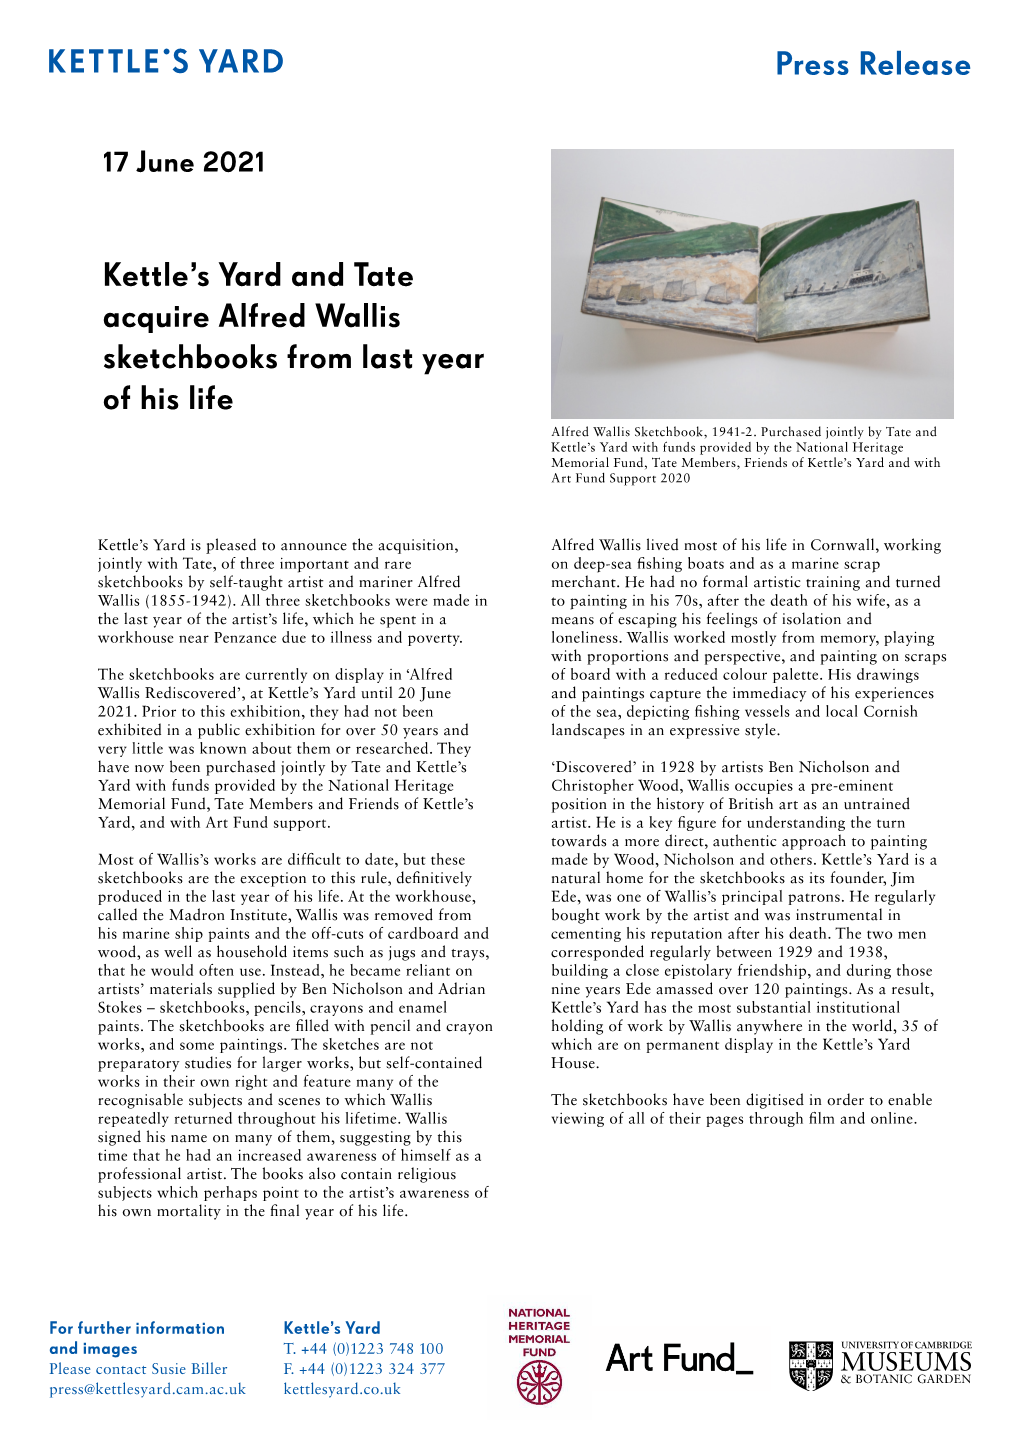 Press Release Kettle's Yard and Tate Acquire Alfred Wallis Sketchbooks